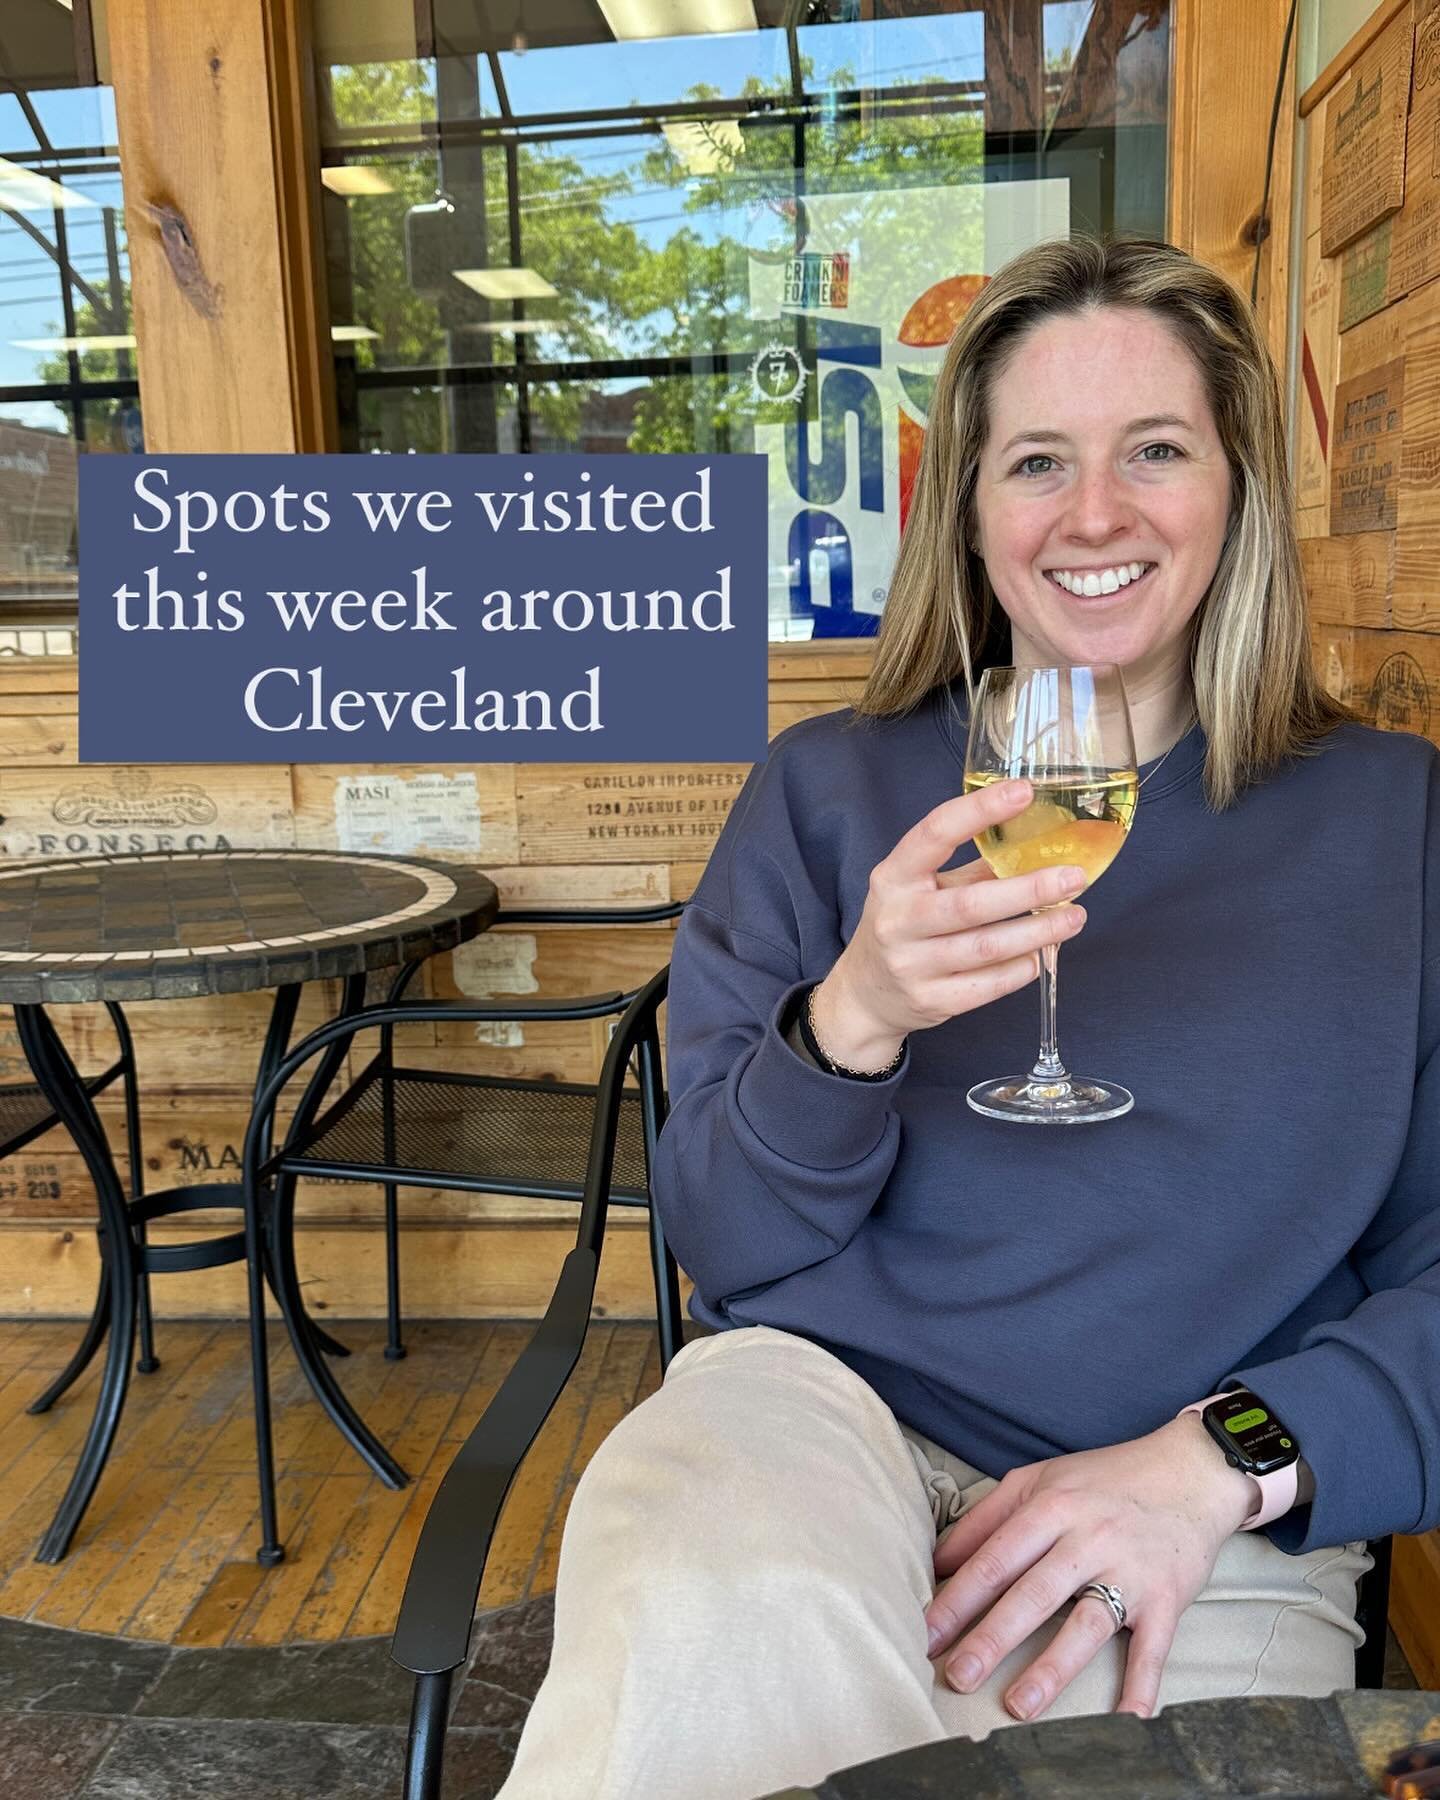 All the spots we visited around Cleveland this week! tell us where we should go this week in the comments! We&rsquo;re working on our summer list. If you&rsquo;re looking for patio inspiration hit the link in our bio for the patio guide. 💃🏼😜